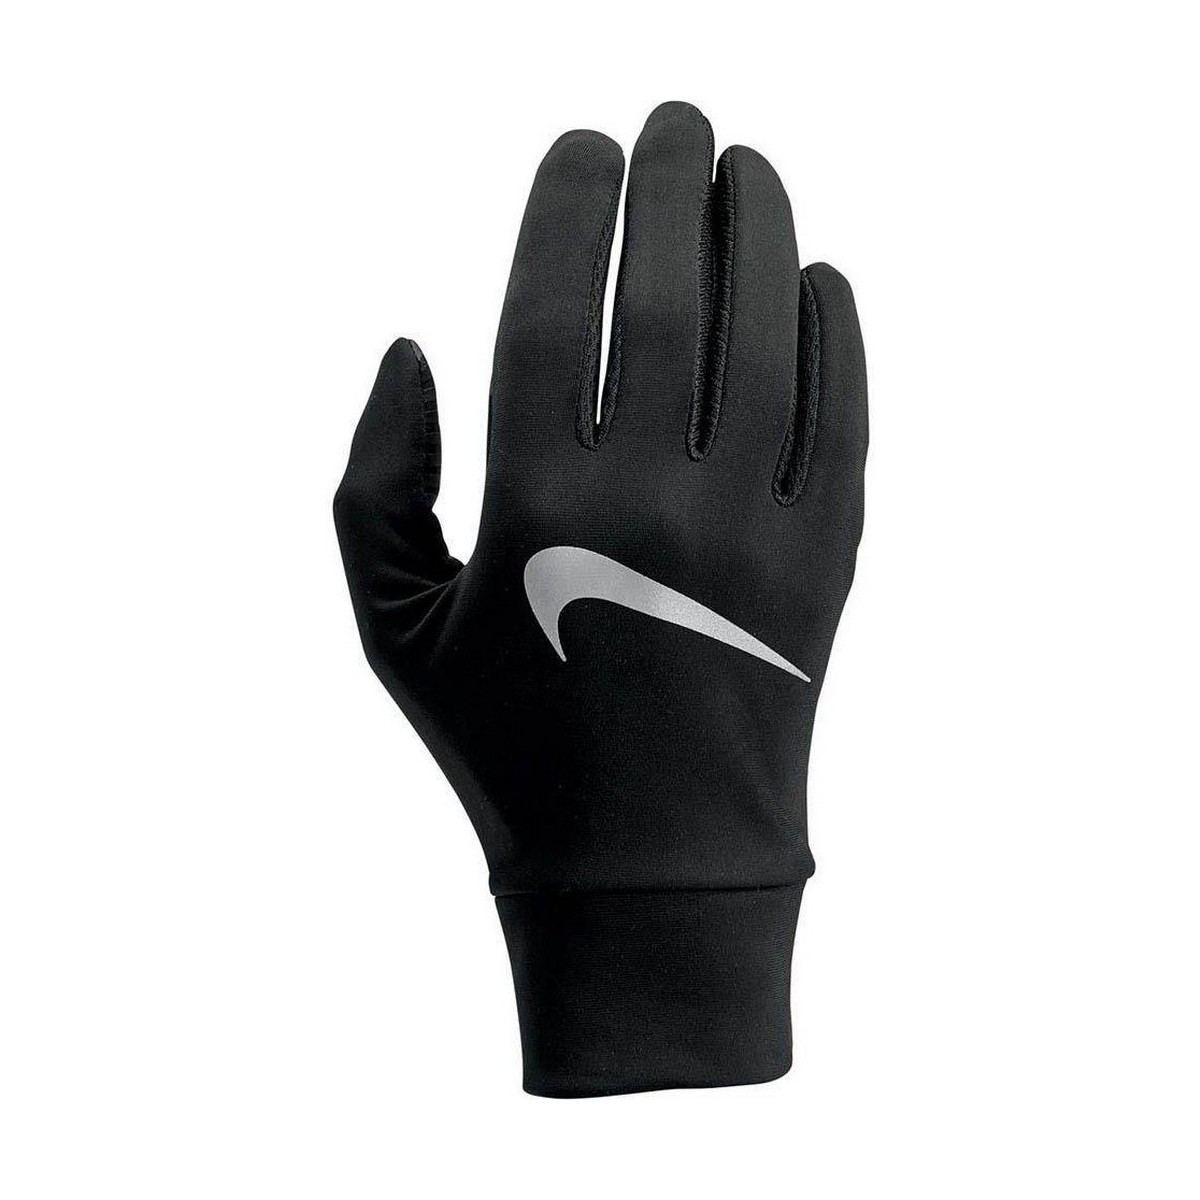 Accesorios textil Mujer Guantes Nike Tech Negro